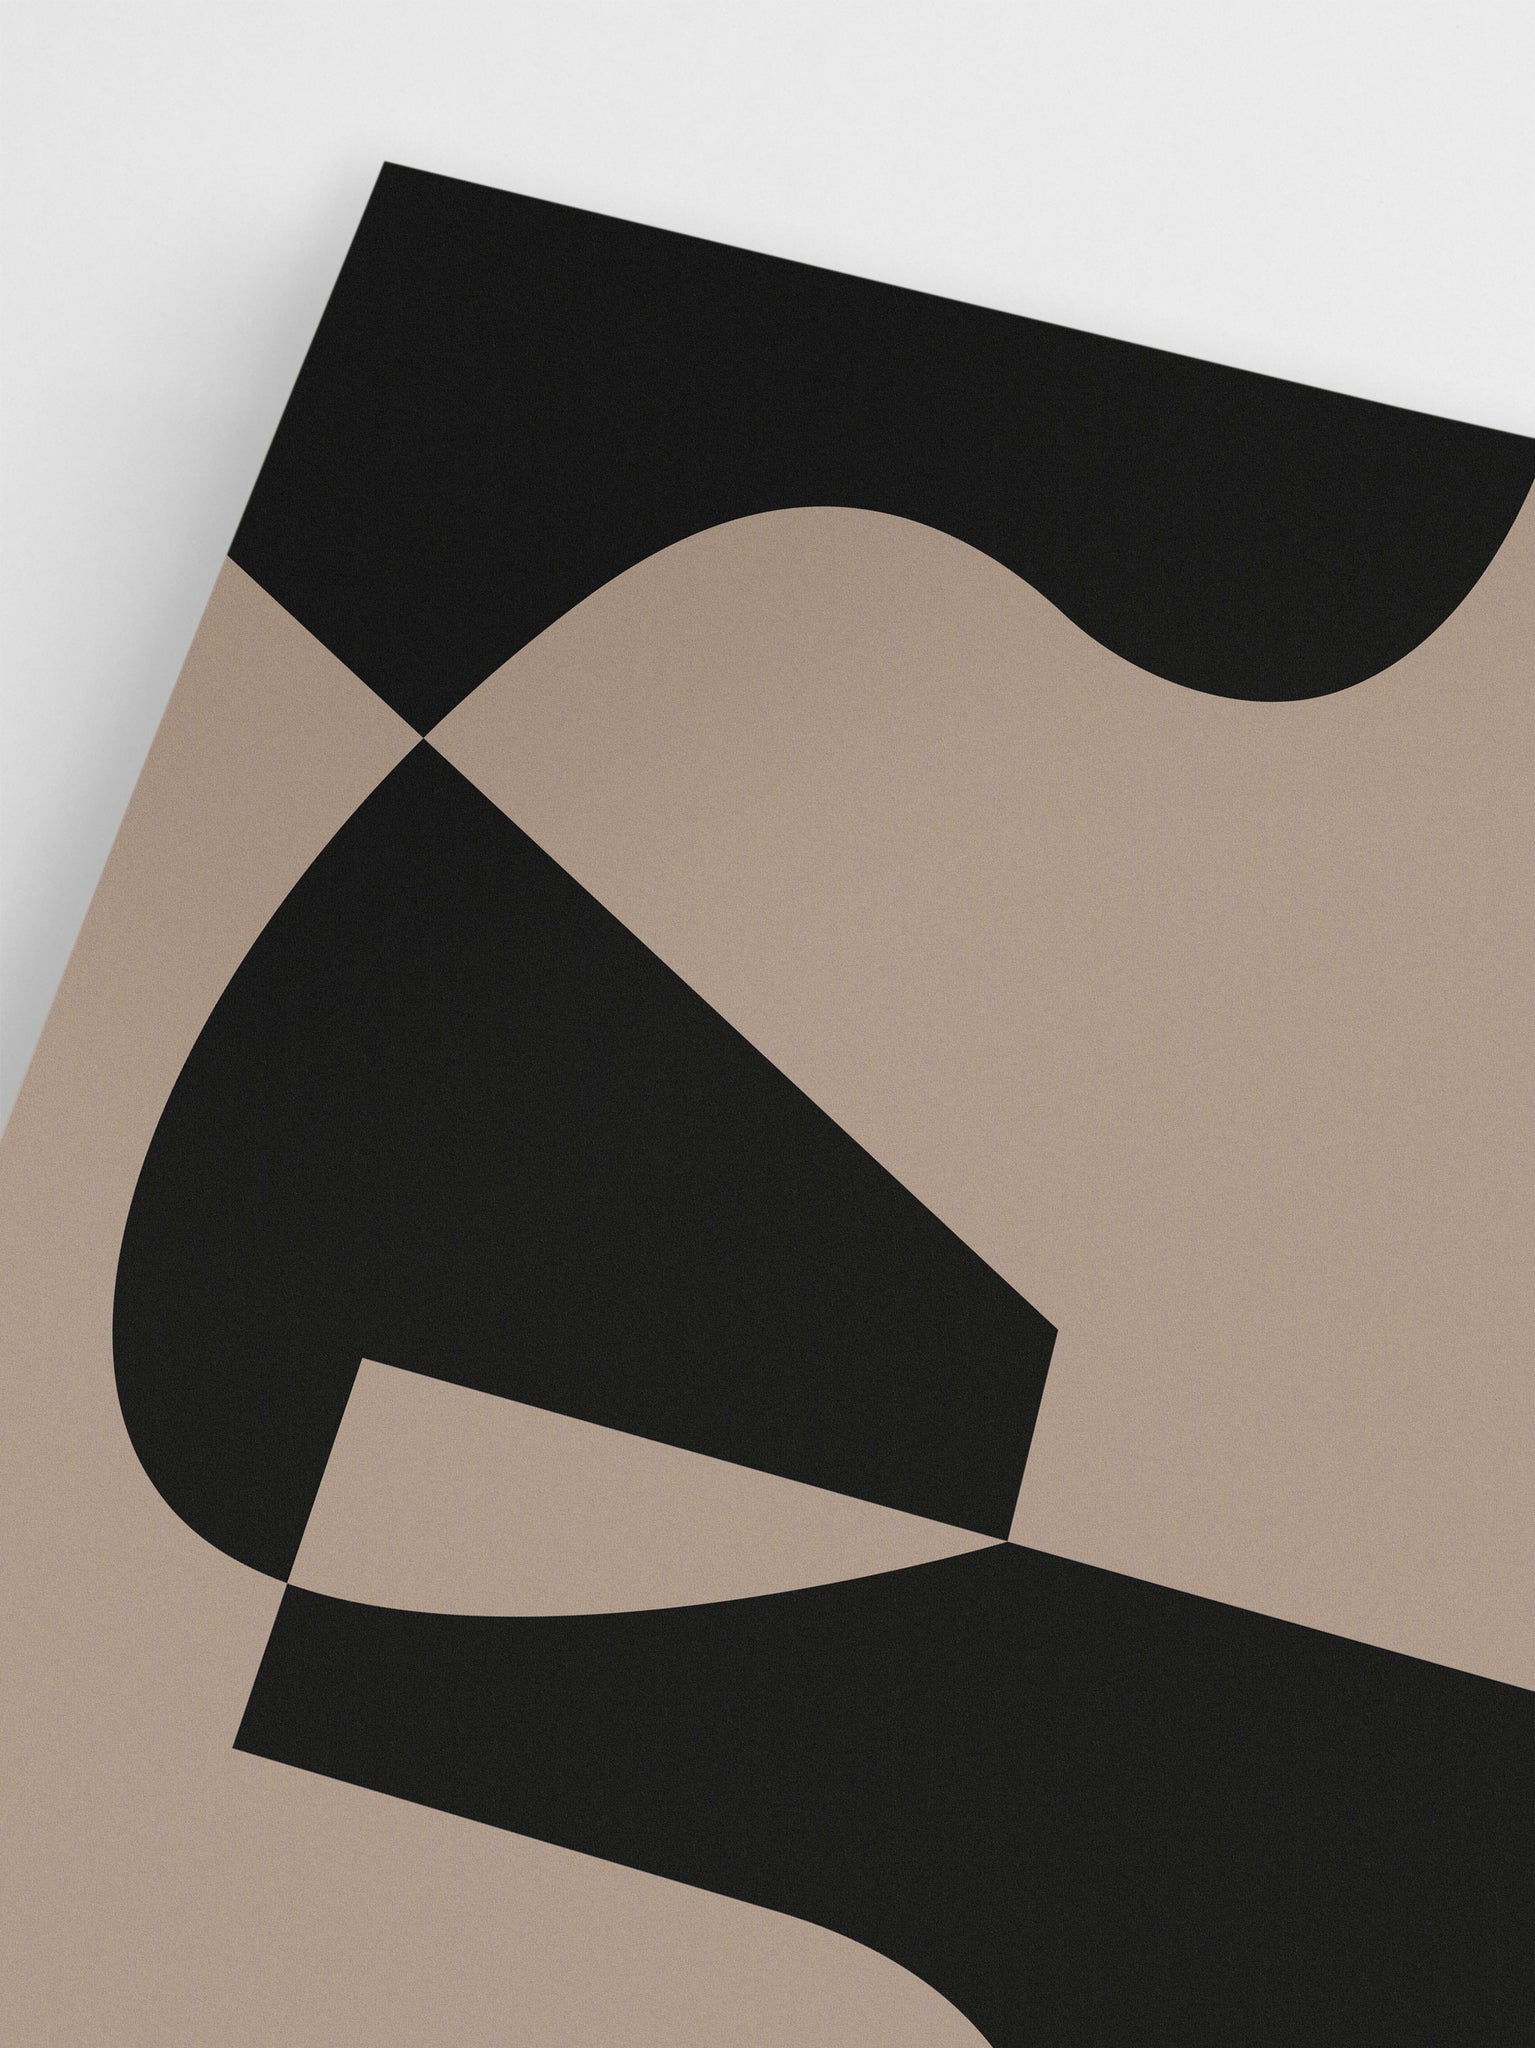 Brown & Black Abstract Shapes Poster